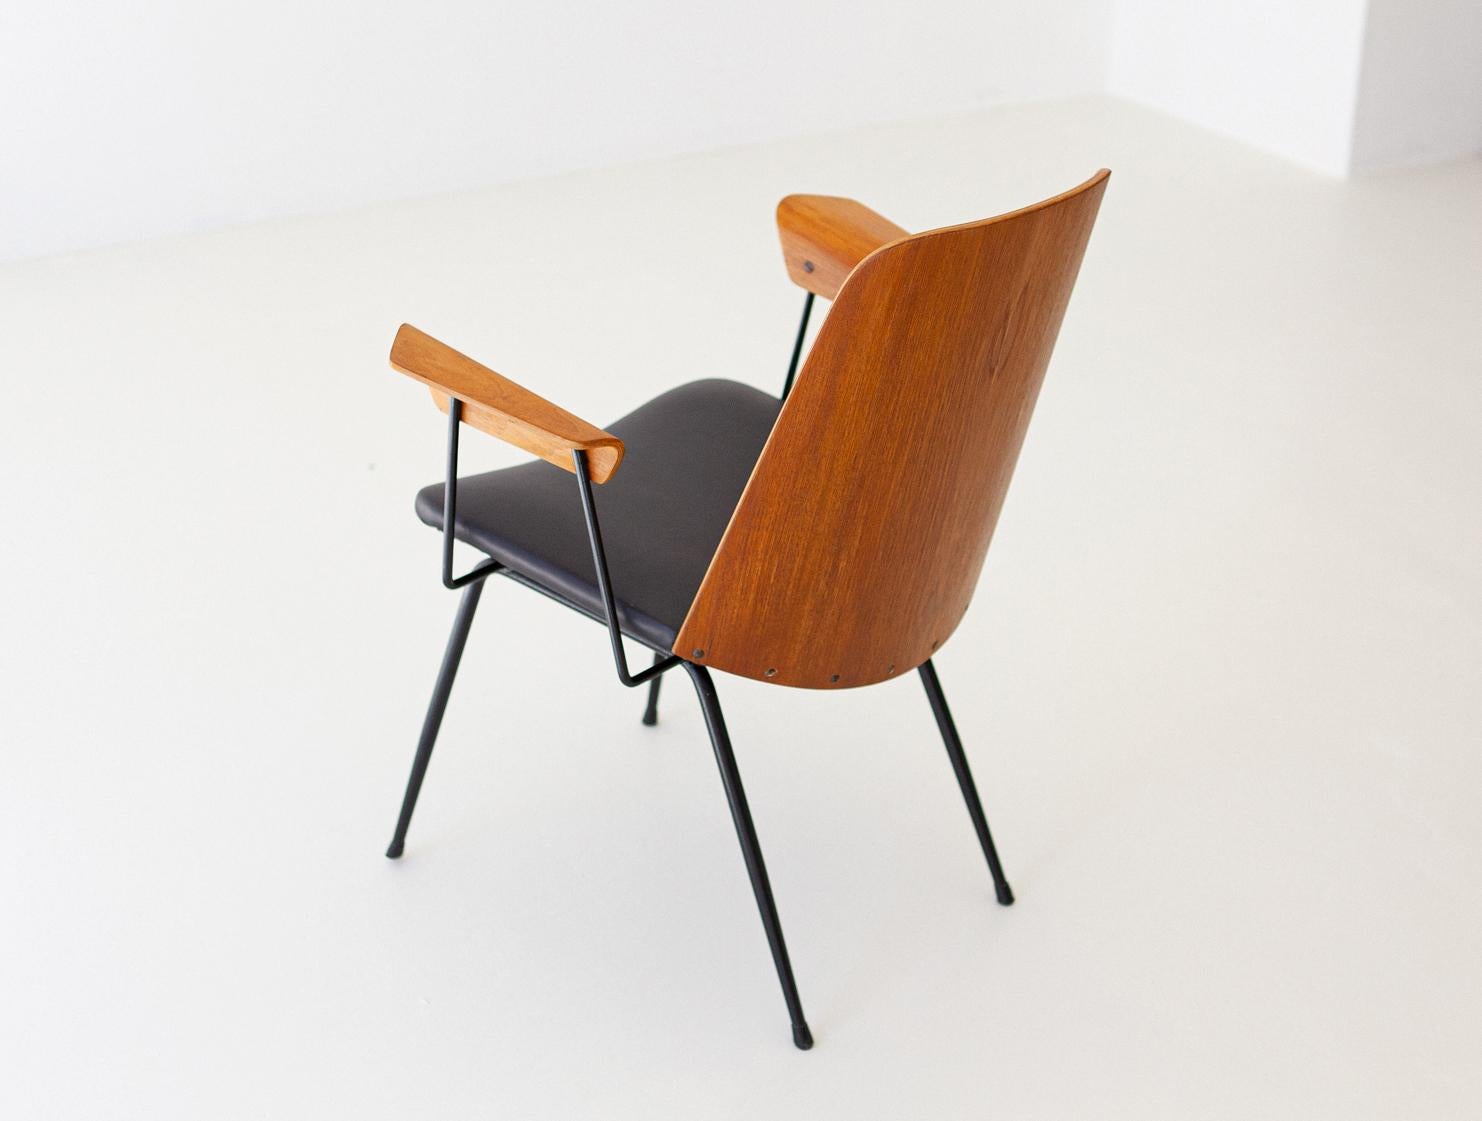 Modern easy chair with armrests,
Model DU22, designed by Gastone Rinaldi and produced by RIMA during the 1950s.

Also usable as desk chair.

Completely restored:
New black natural leather and new padding 
New teak veneer on the curved